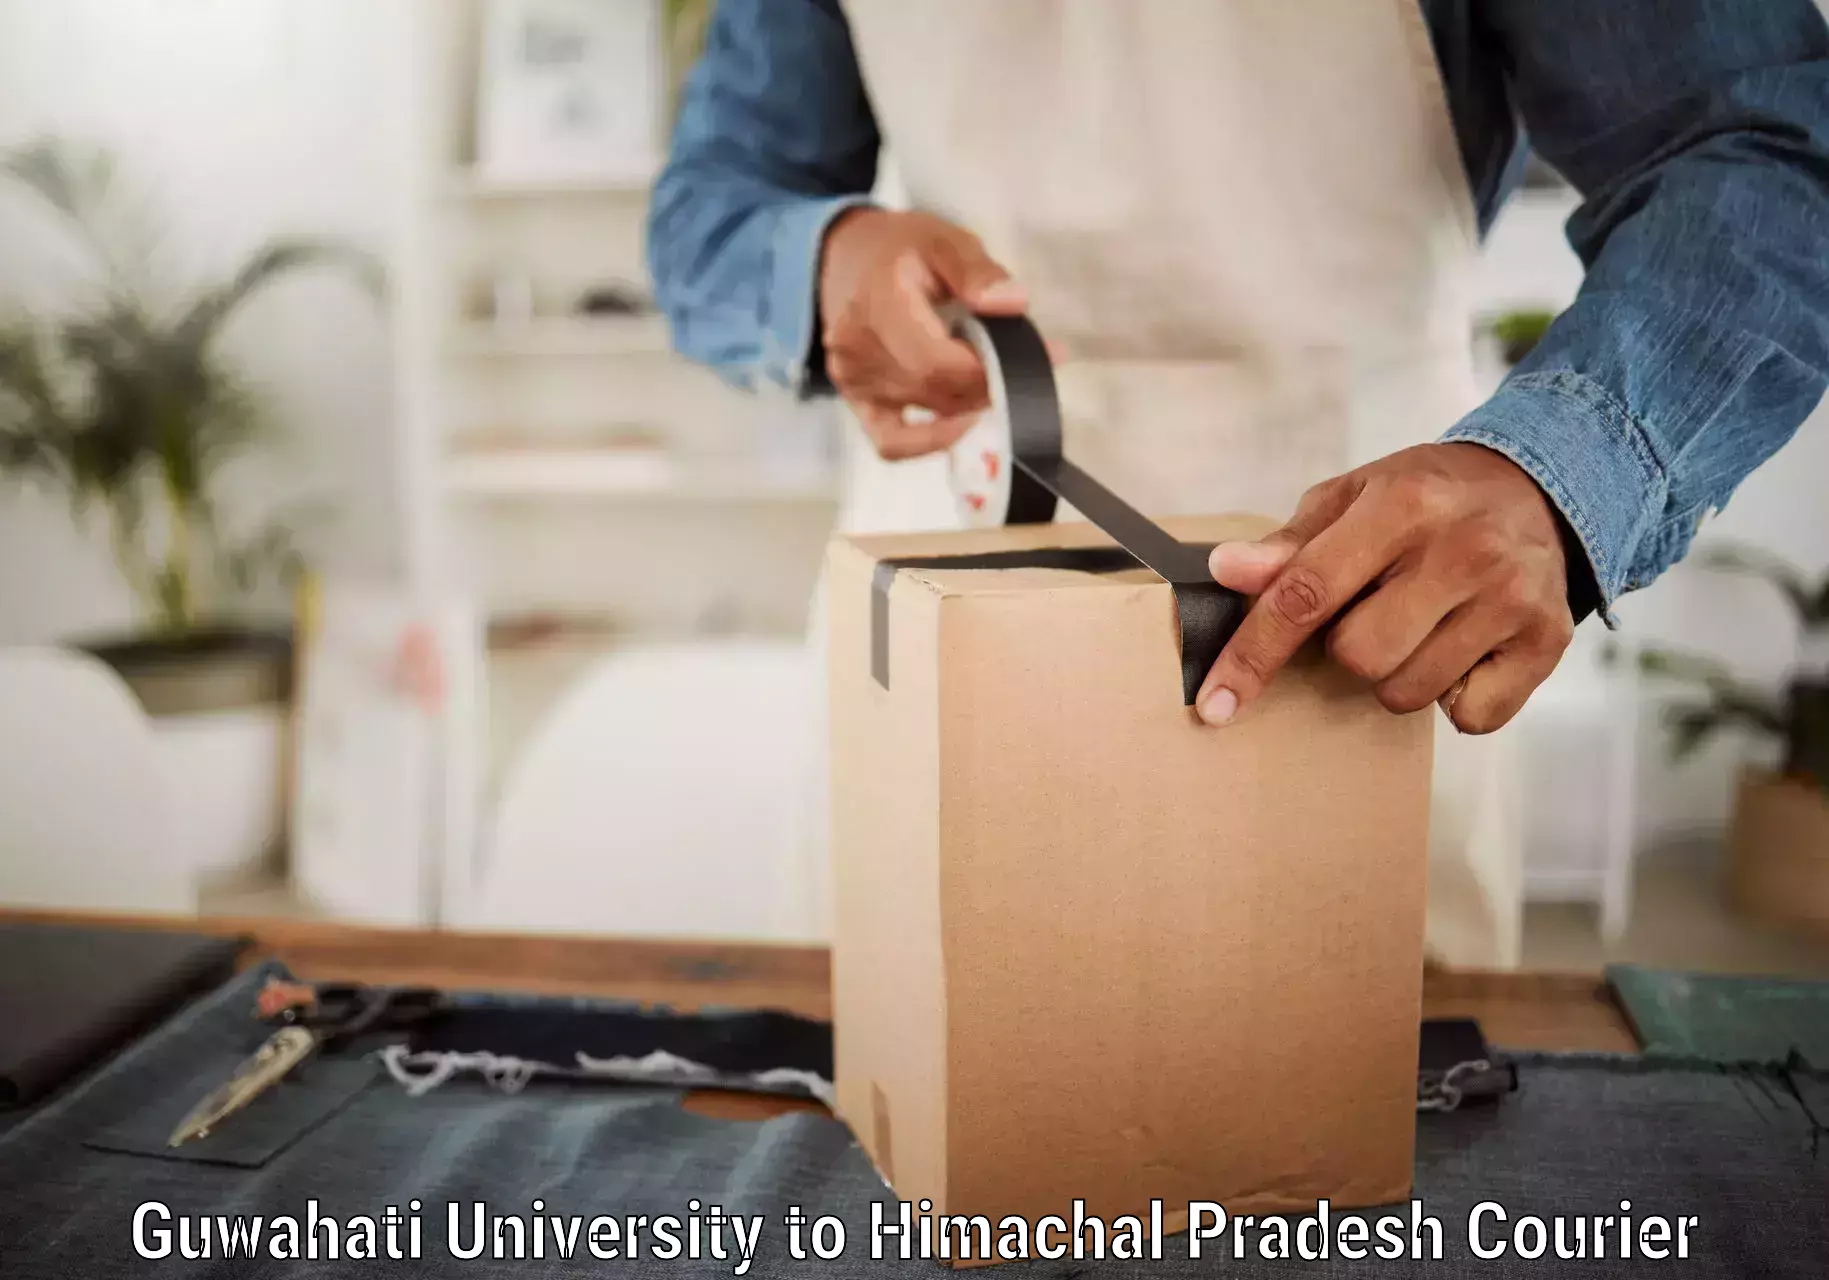 Residential courier service Guwahati University to Palampur